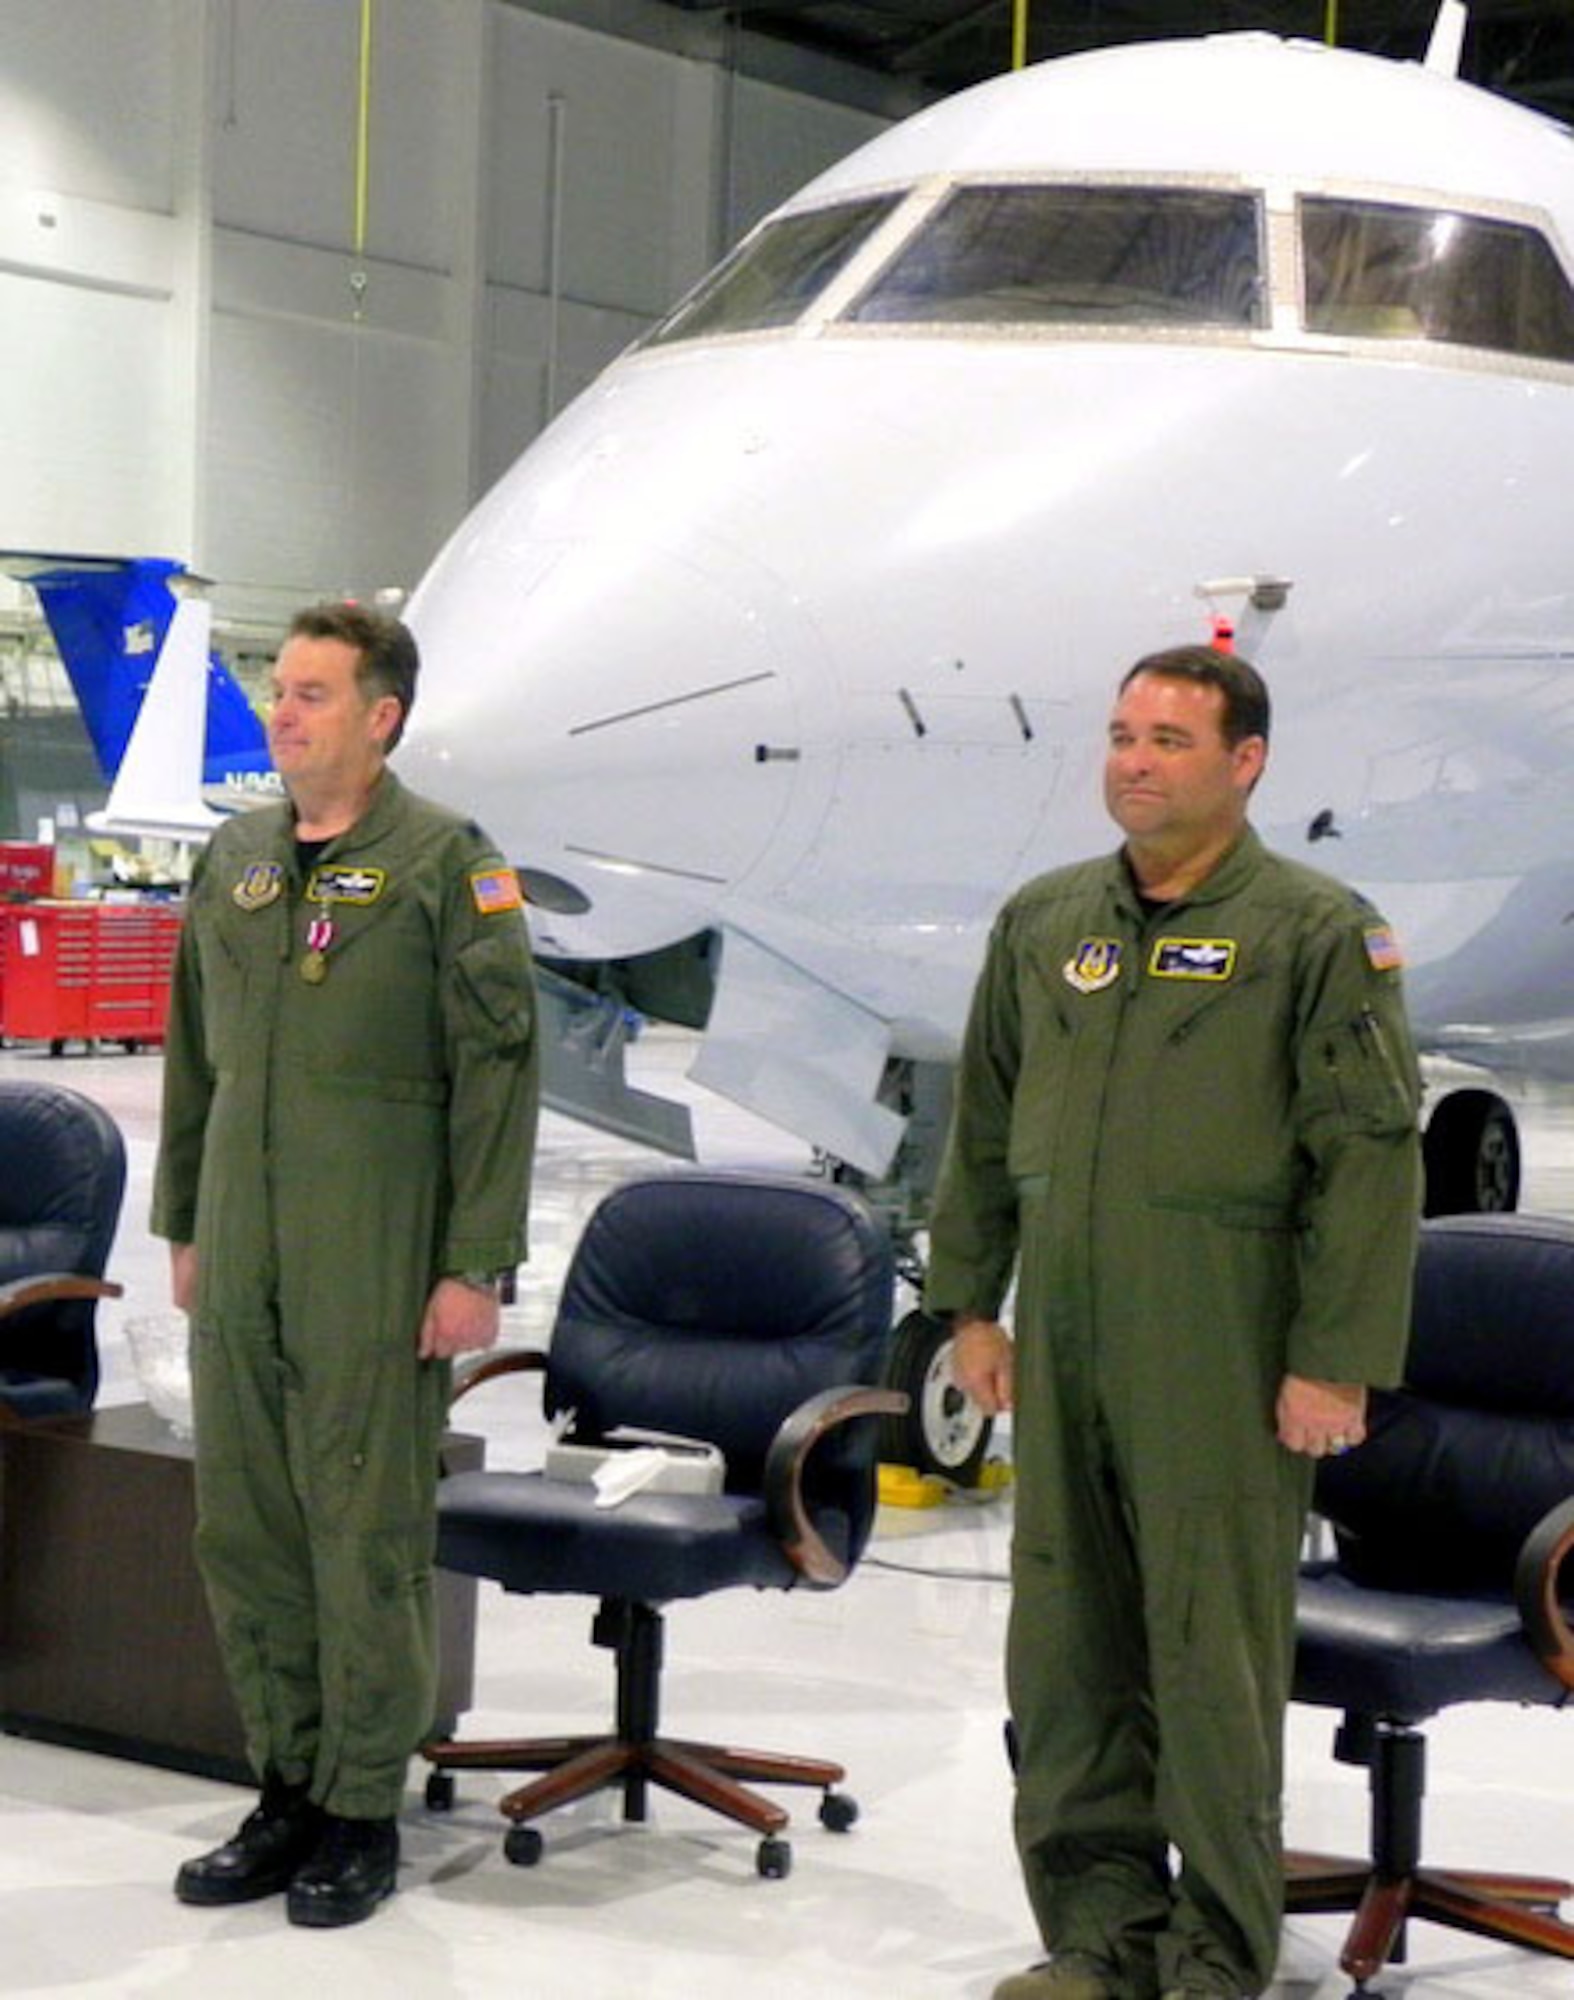 Maj. Robert F. “Bobby” Loher, right, became the commander of the 1st Aviation Standards Flight during a recent change of command ceremony. Major Loher spent the last 10 years teaching and training for the T-1A Program at Randolph AFB, Texas. Outgoing commander, Lt. Col. Randall Peterson, is on the left.  Peterson had been commander of the 1st ASF since 1998 and was the first commander for the Flight.